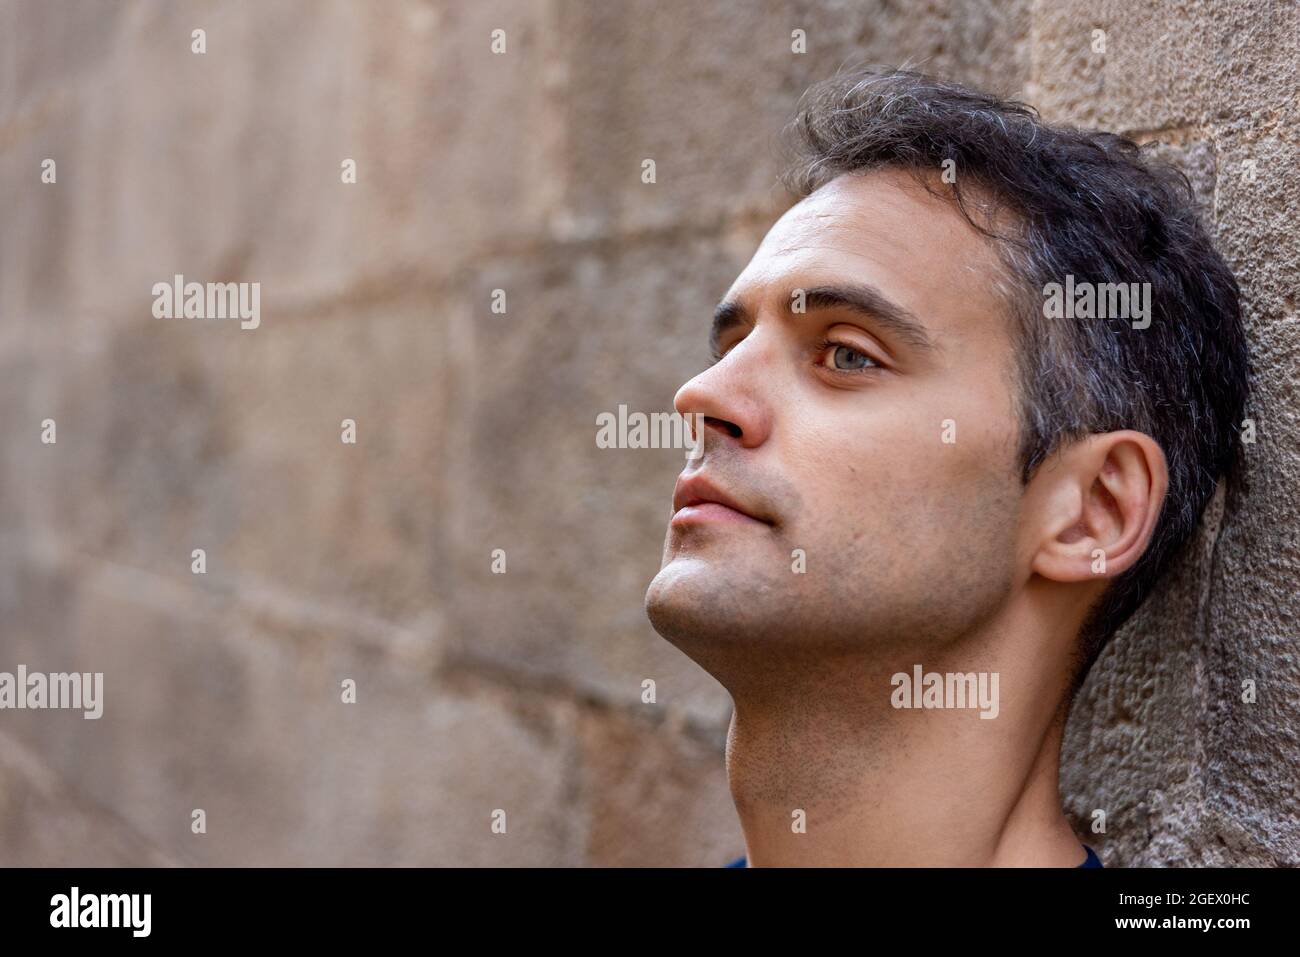 Young latin thoughtful man against a wall outdoors Stock Photo